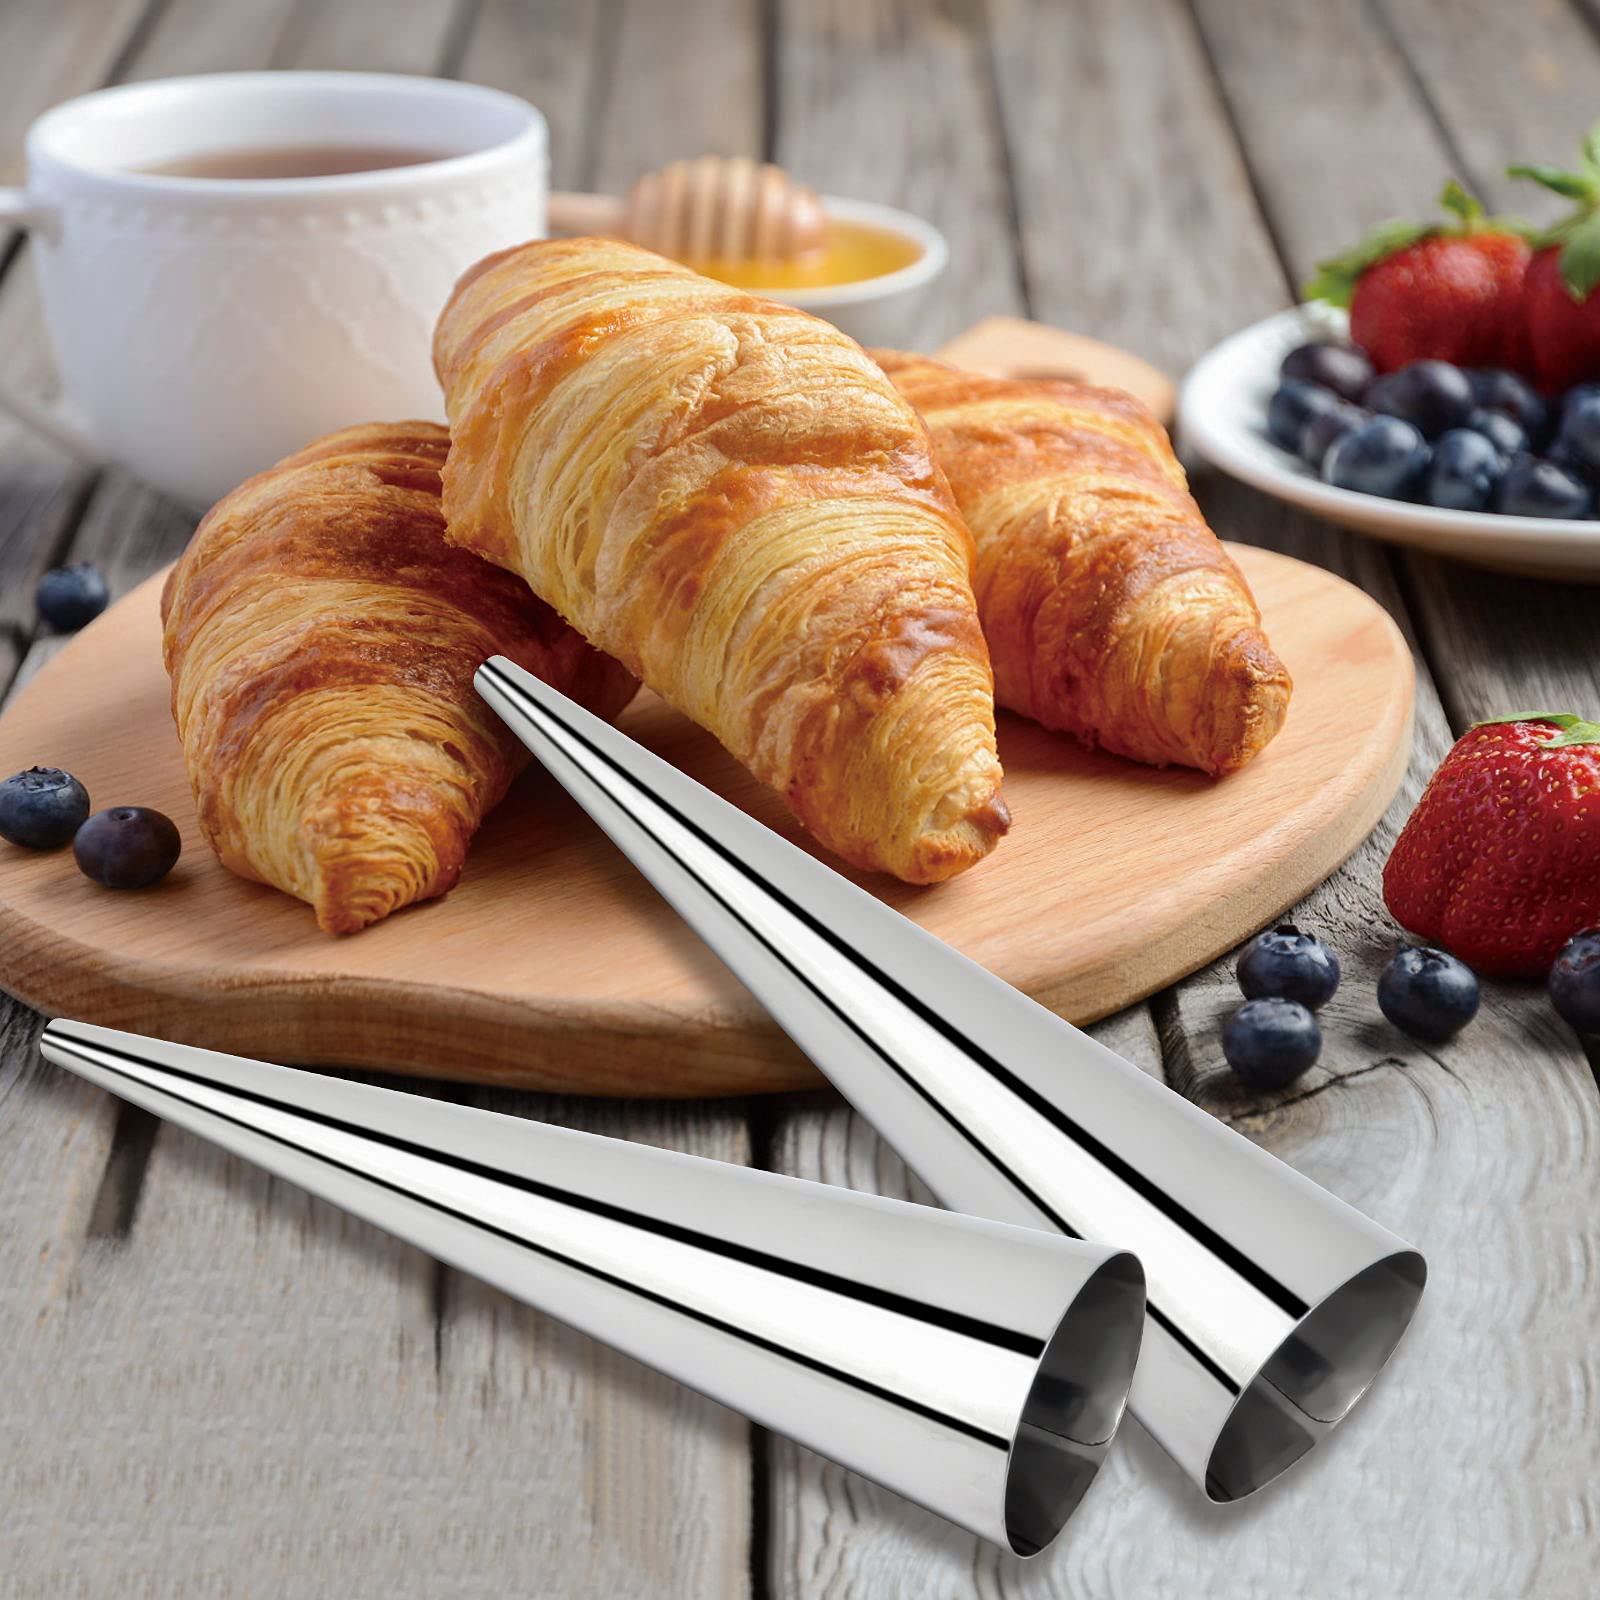 Cream Horn Molds 16pcs Large Size 4.7 inch Baking Cones Stainless Steel Roll Horn Forms Conical Danish Pastry Croissant Cones Moulds